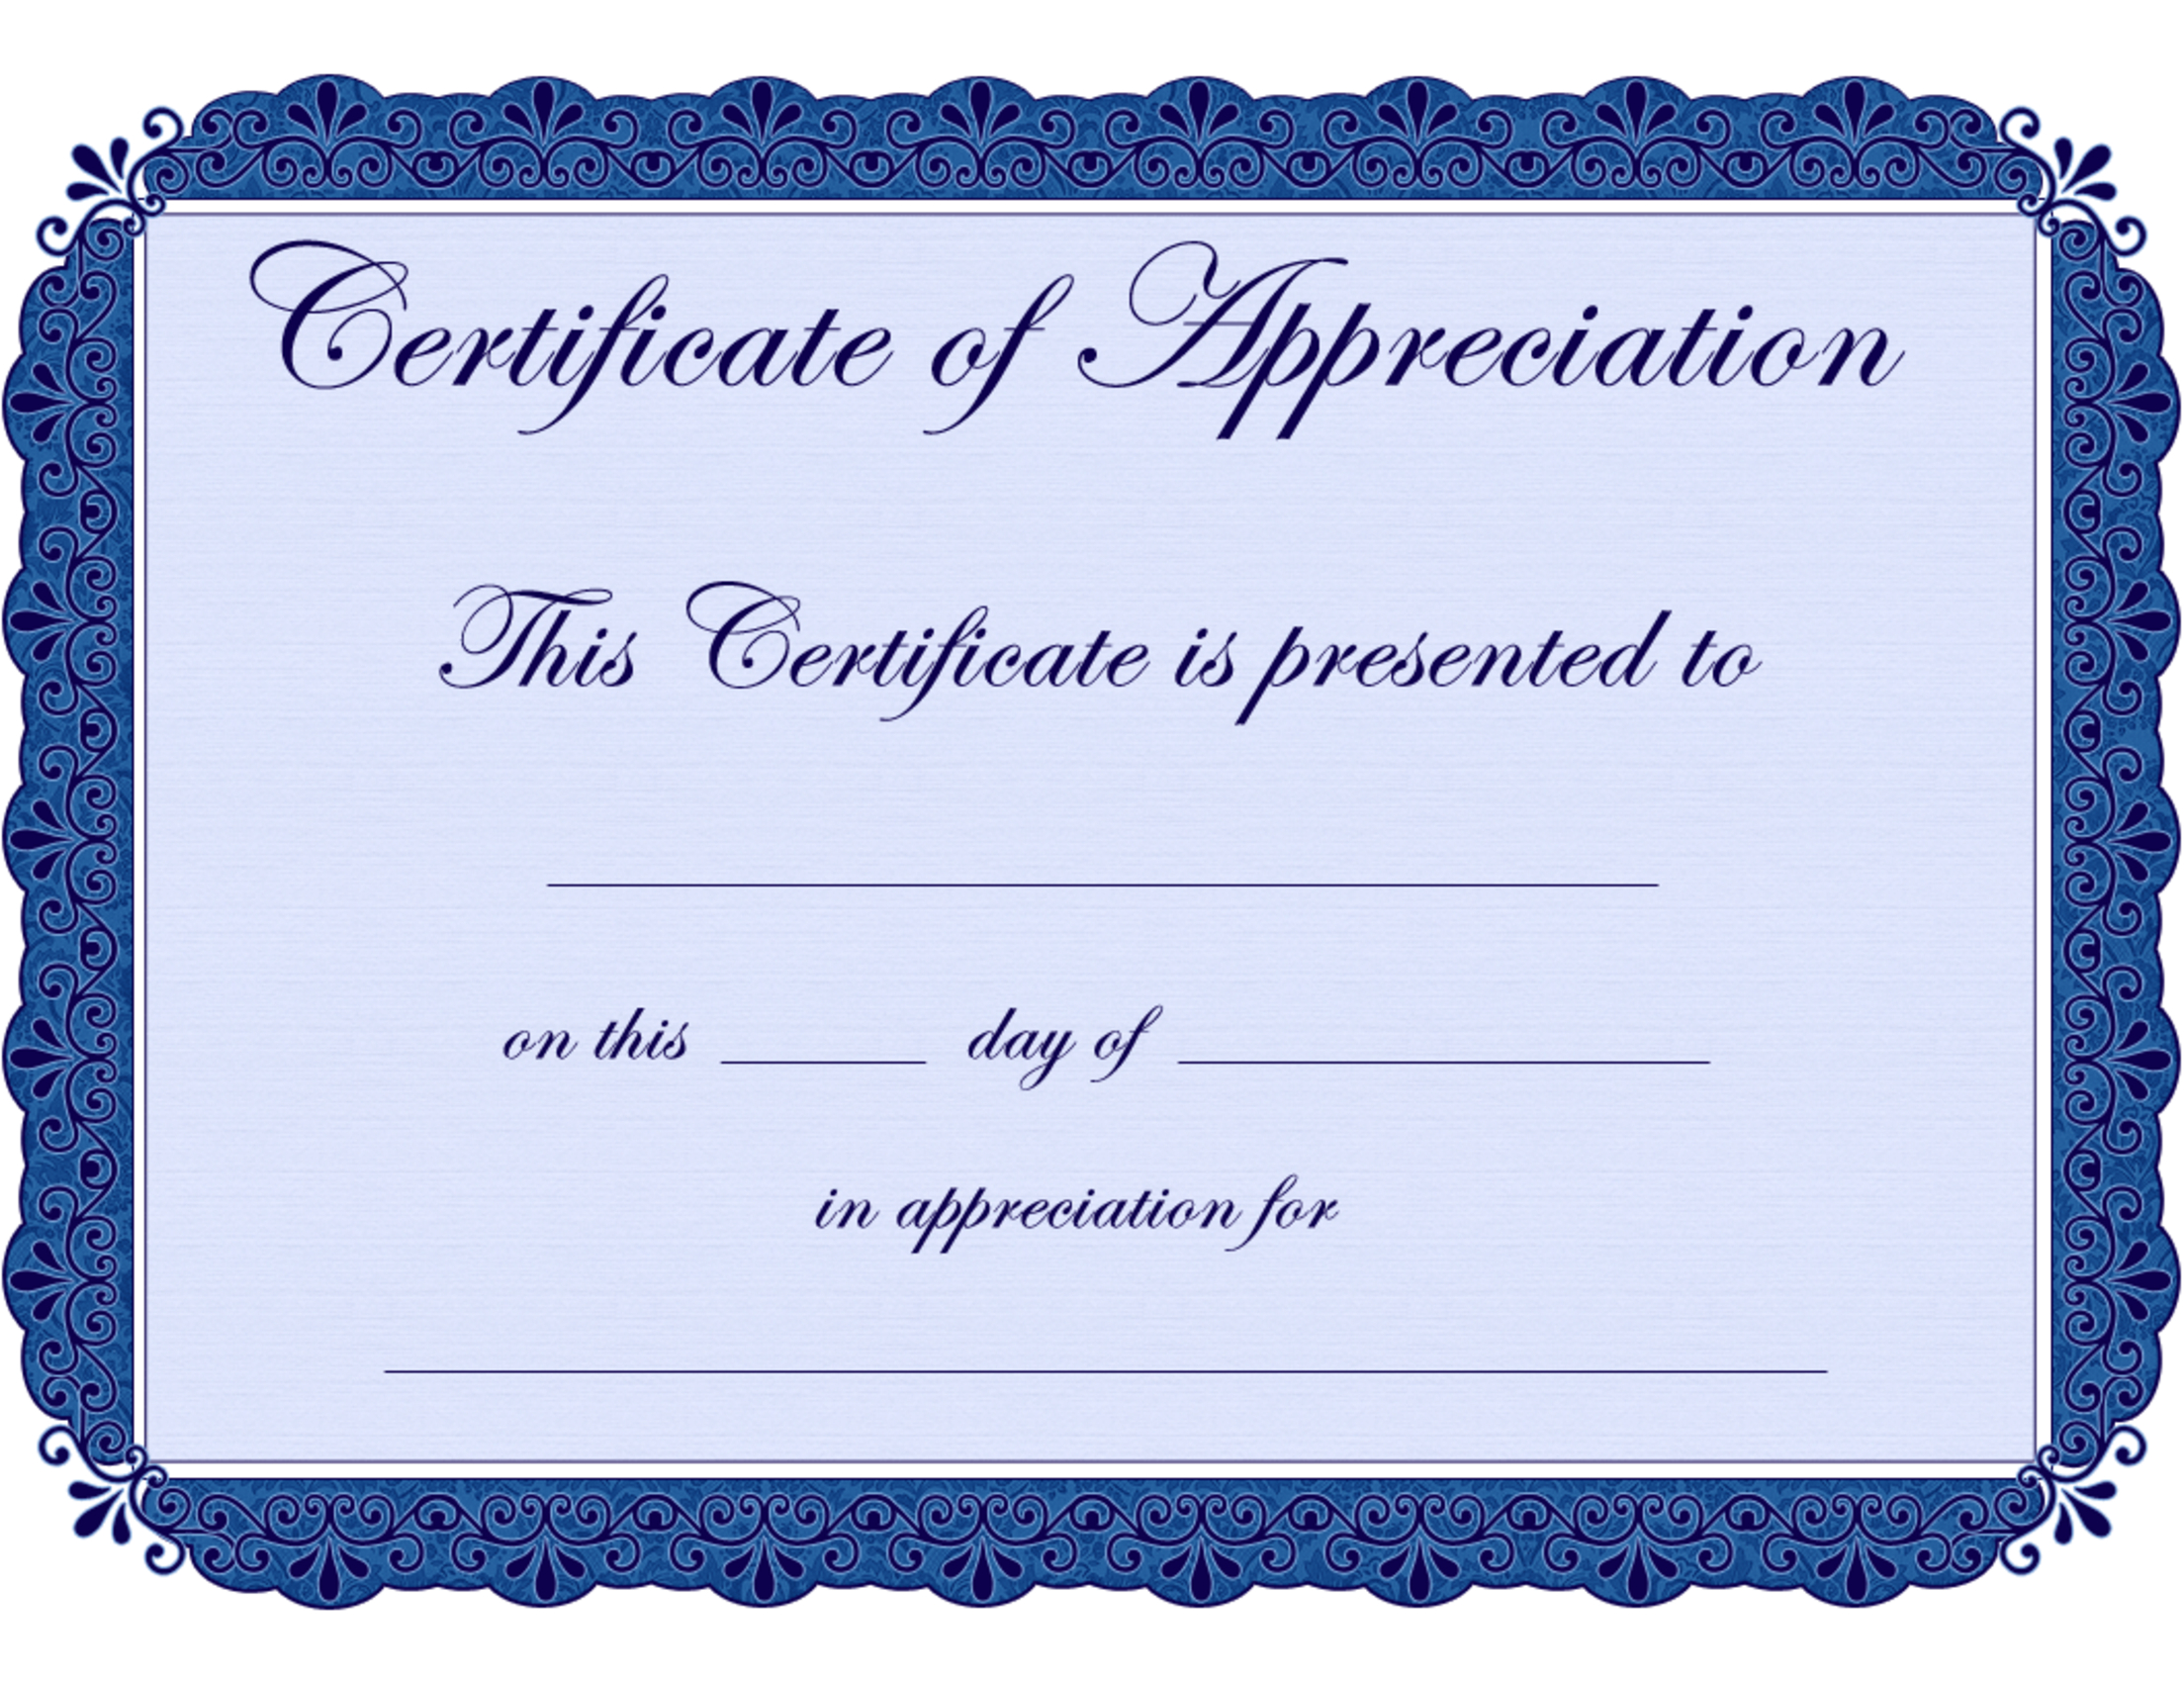 Free Printable Certificates Certificate Of Appreciation With Word 2013 Certificate Template